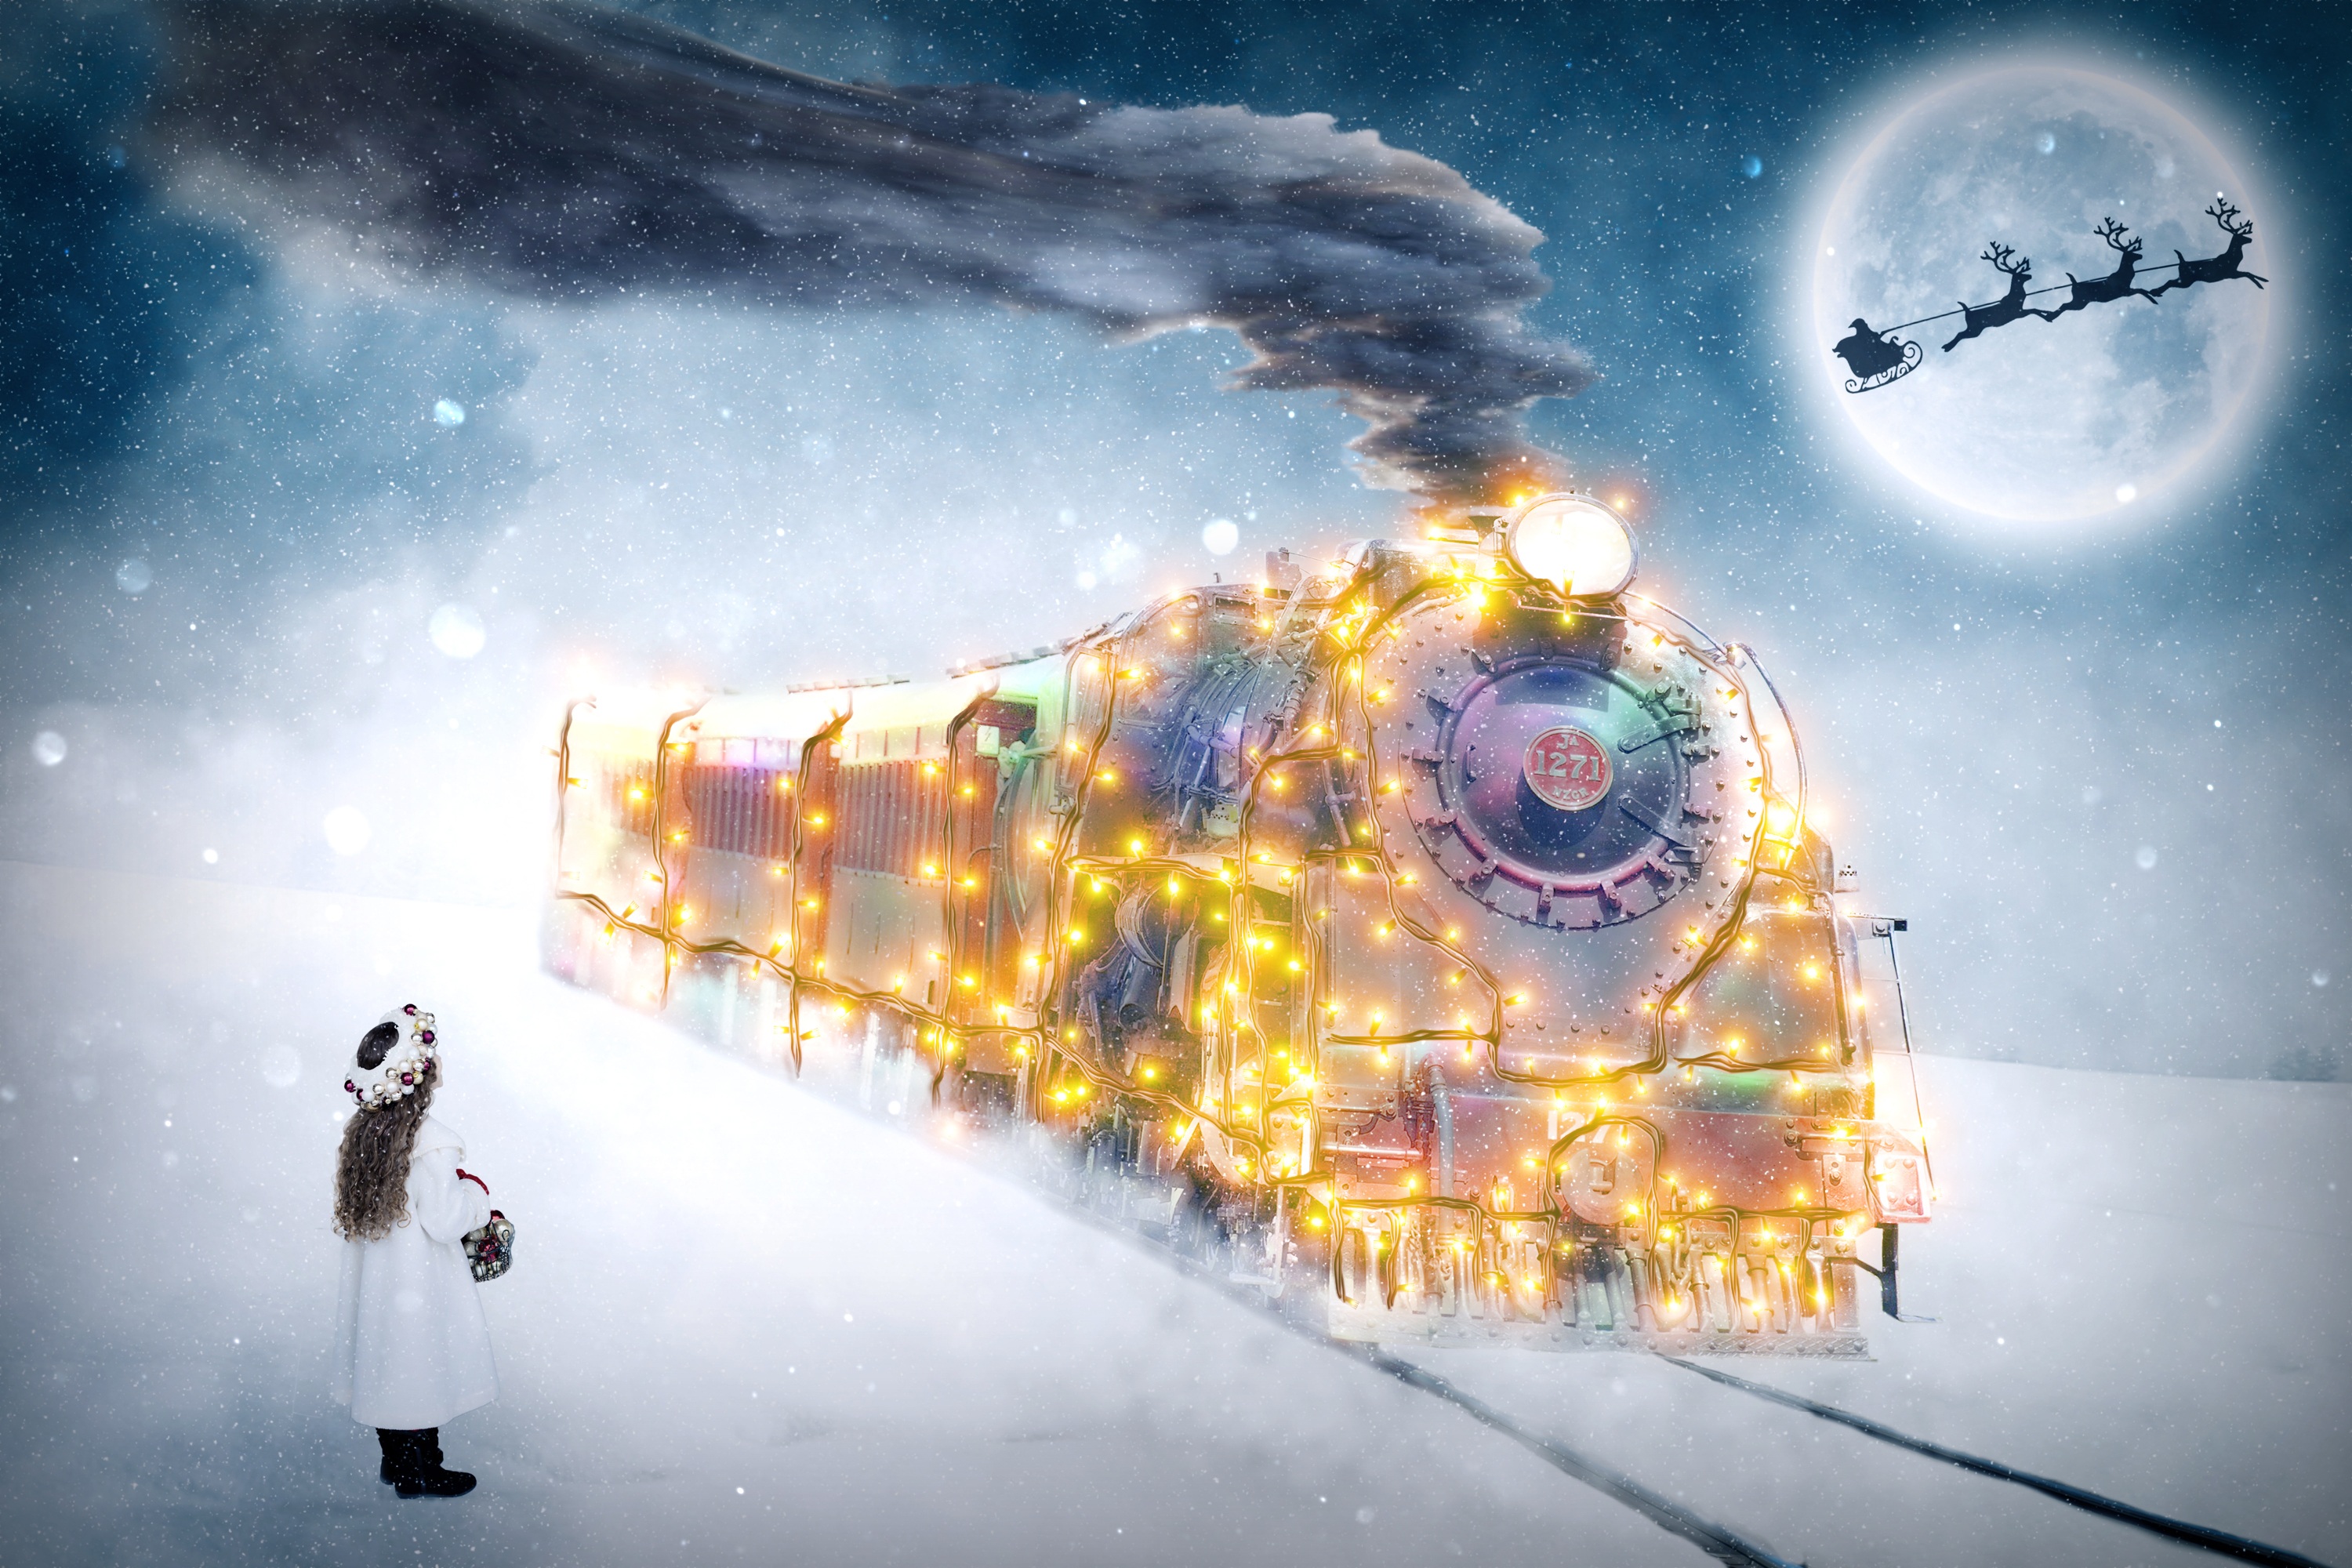 Edited photo of a little girl waiting in the snow for a train covered in Christmas lights with the silhouette of Santa's sleigh across the moon.